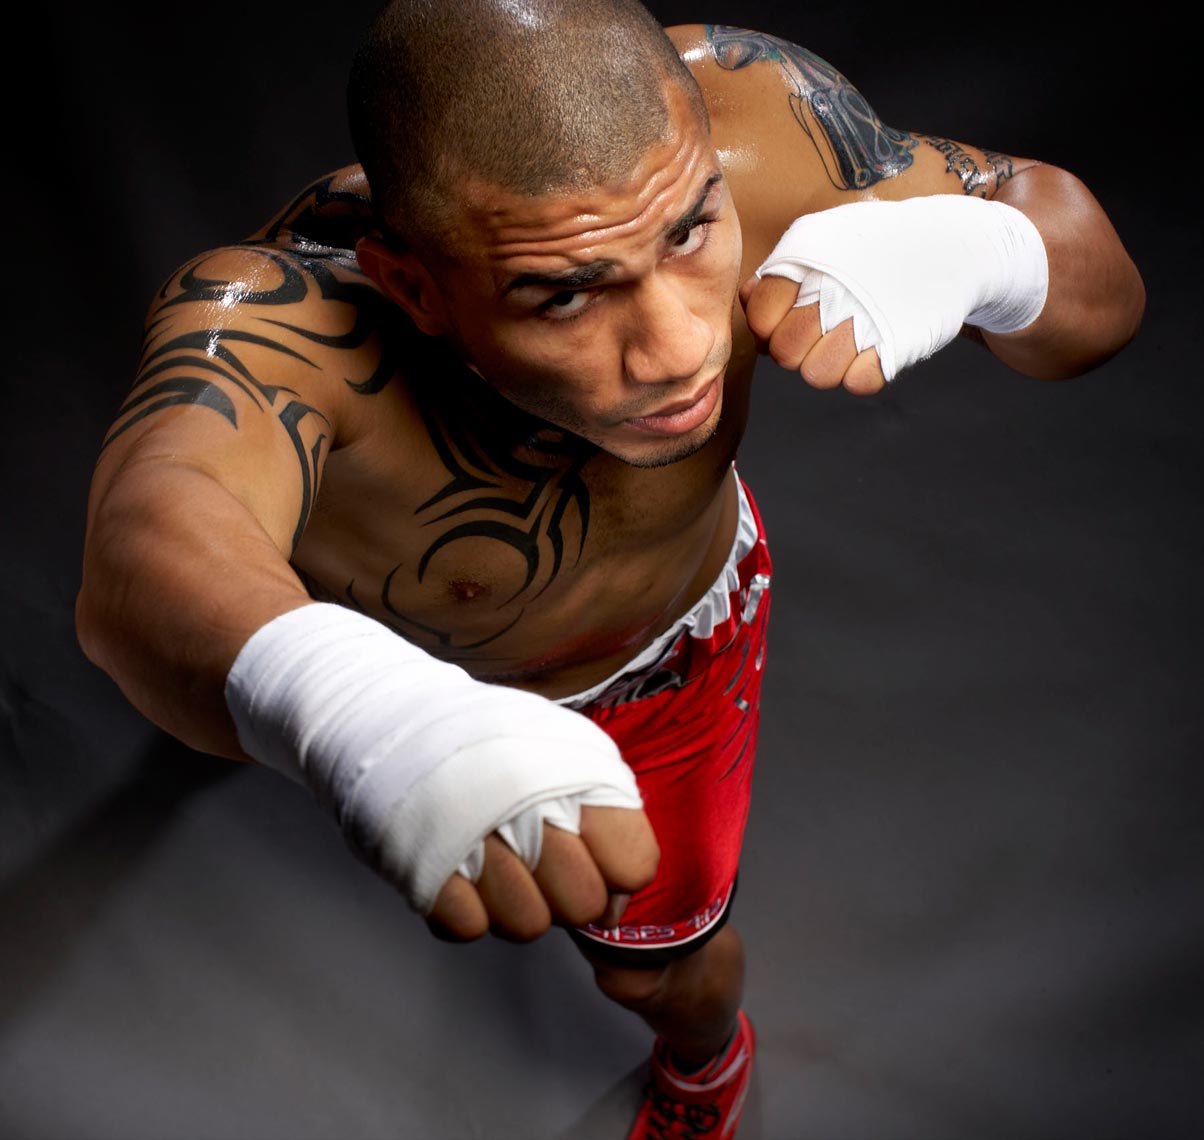 Miguel Cotto HBO boxing photo by Monte Isom.